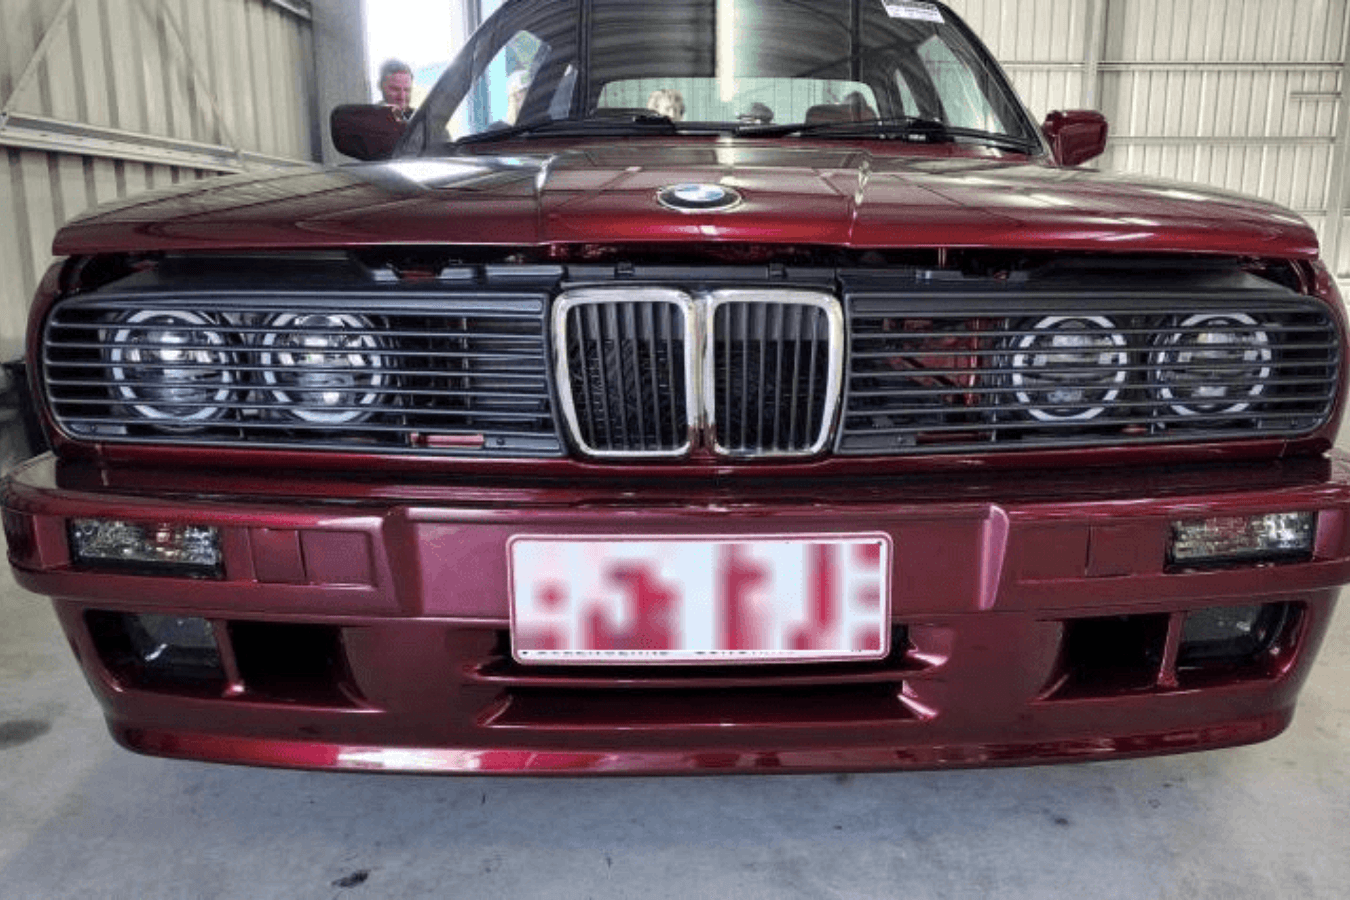 BMW E30 Series 3 Steady Style Front Grille and Headlights (1984 - 1991) - K2 Industries